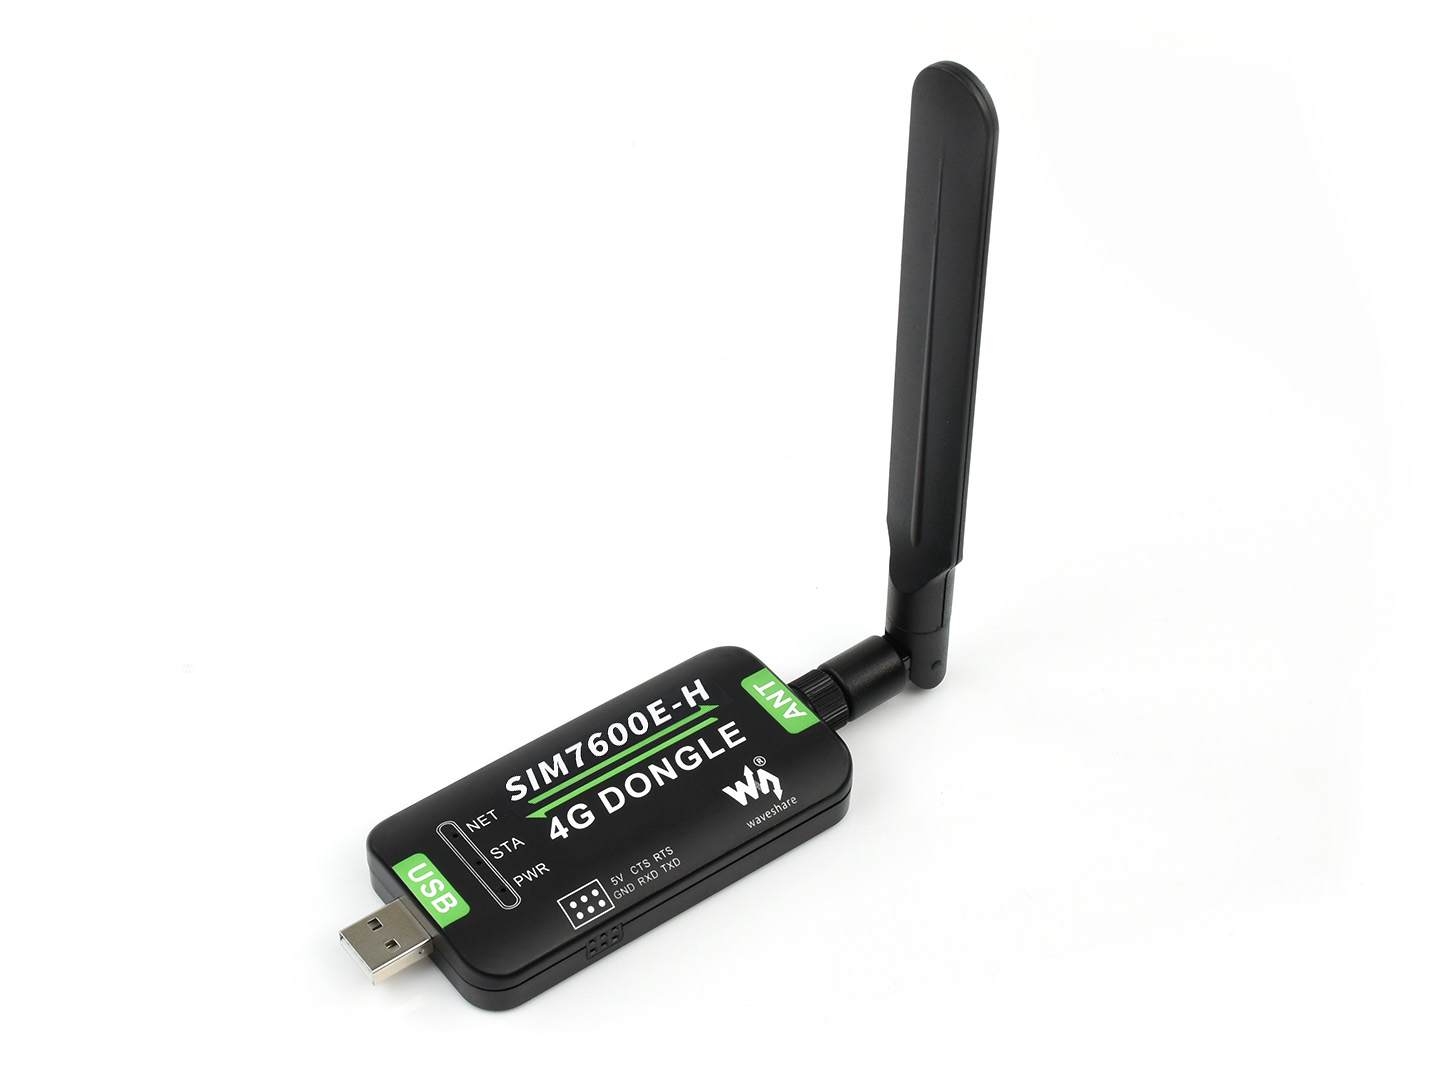 SIM7600E-H 4G DONGLE With Antenna, Industrial Grade 4G